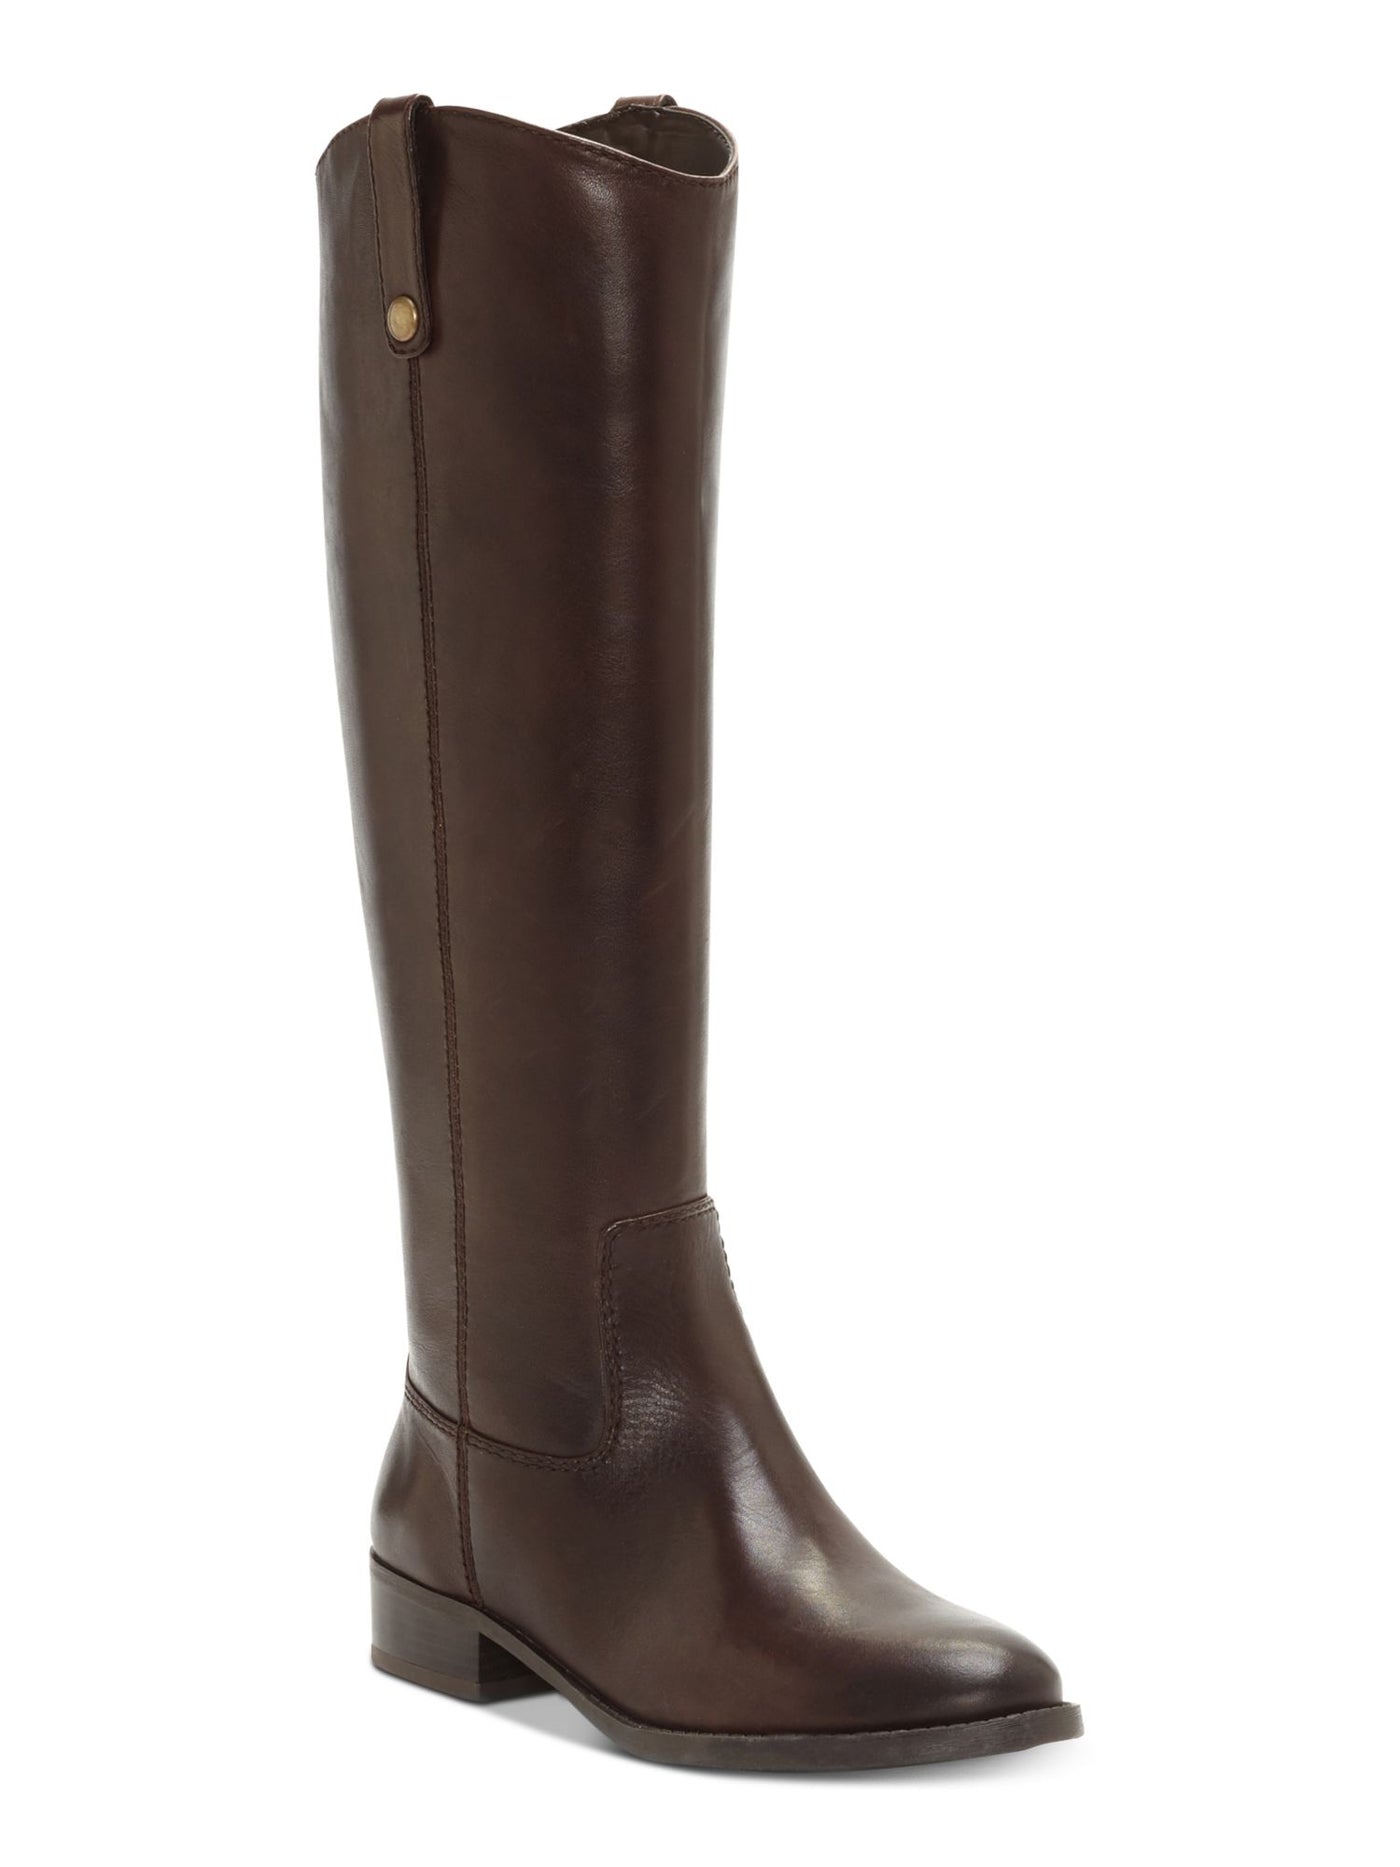 INC Womens Brown Goring Fawne Round Toe Block Heel Zip-Up Leather Riding Boot 7 M WC